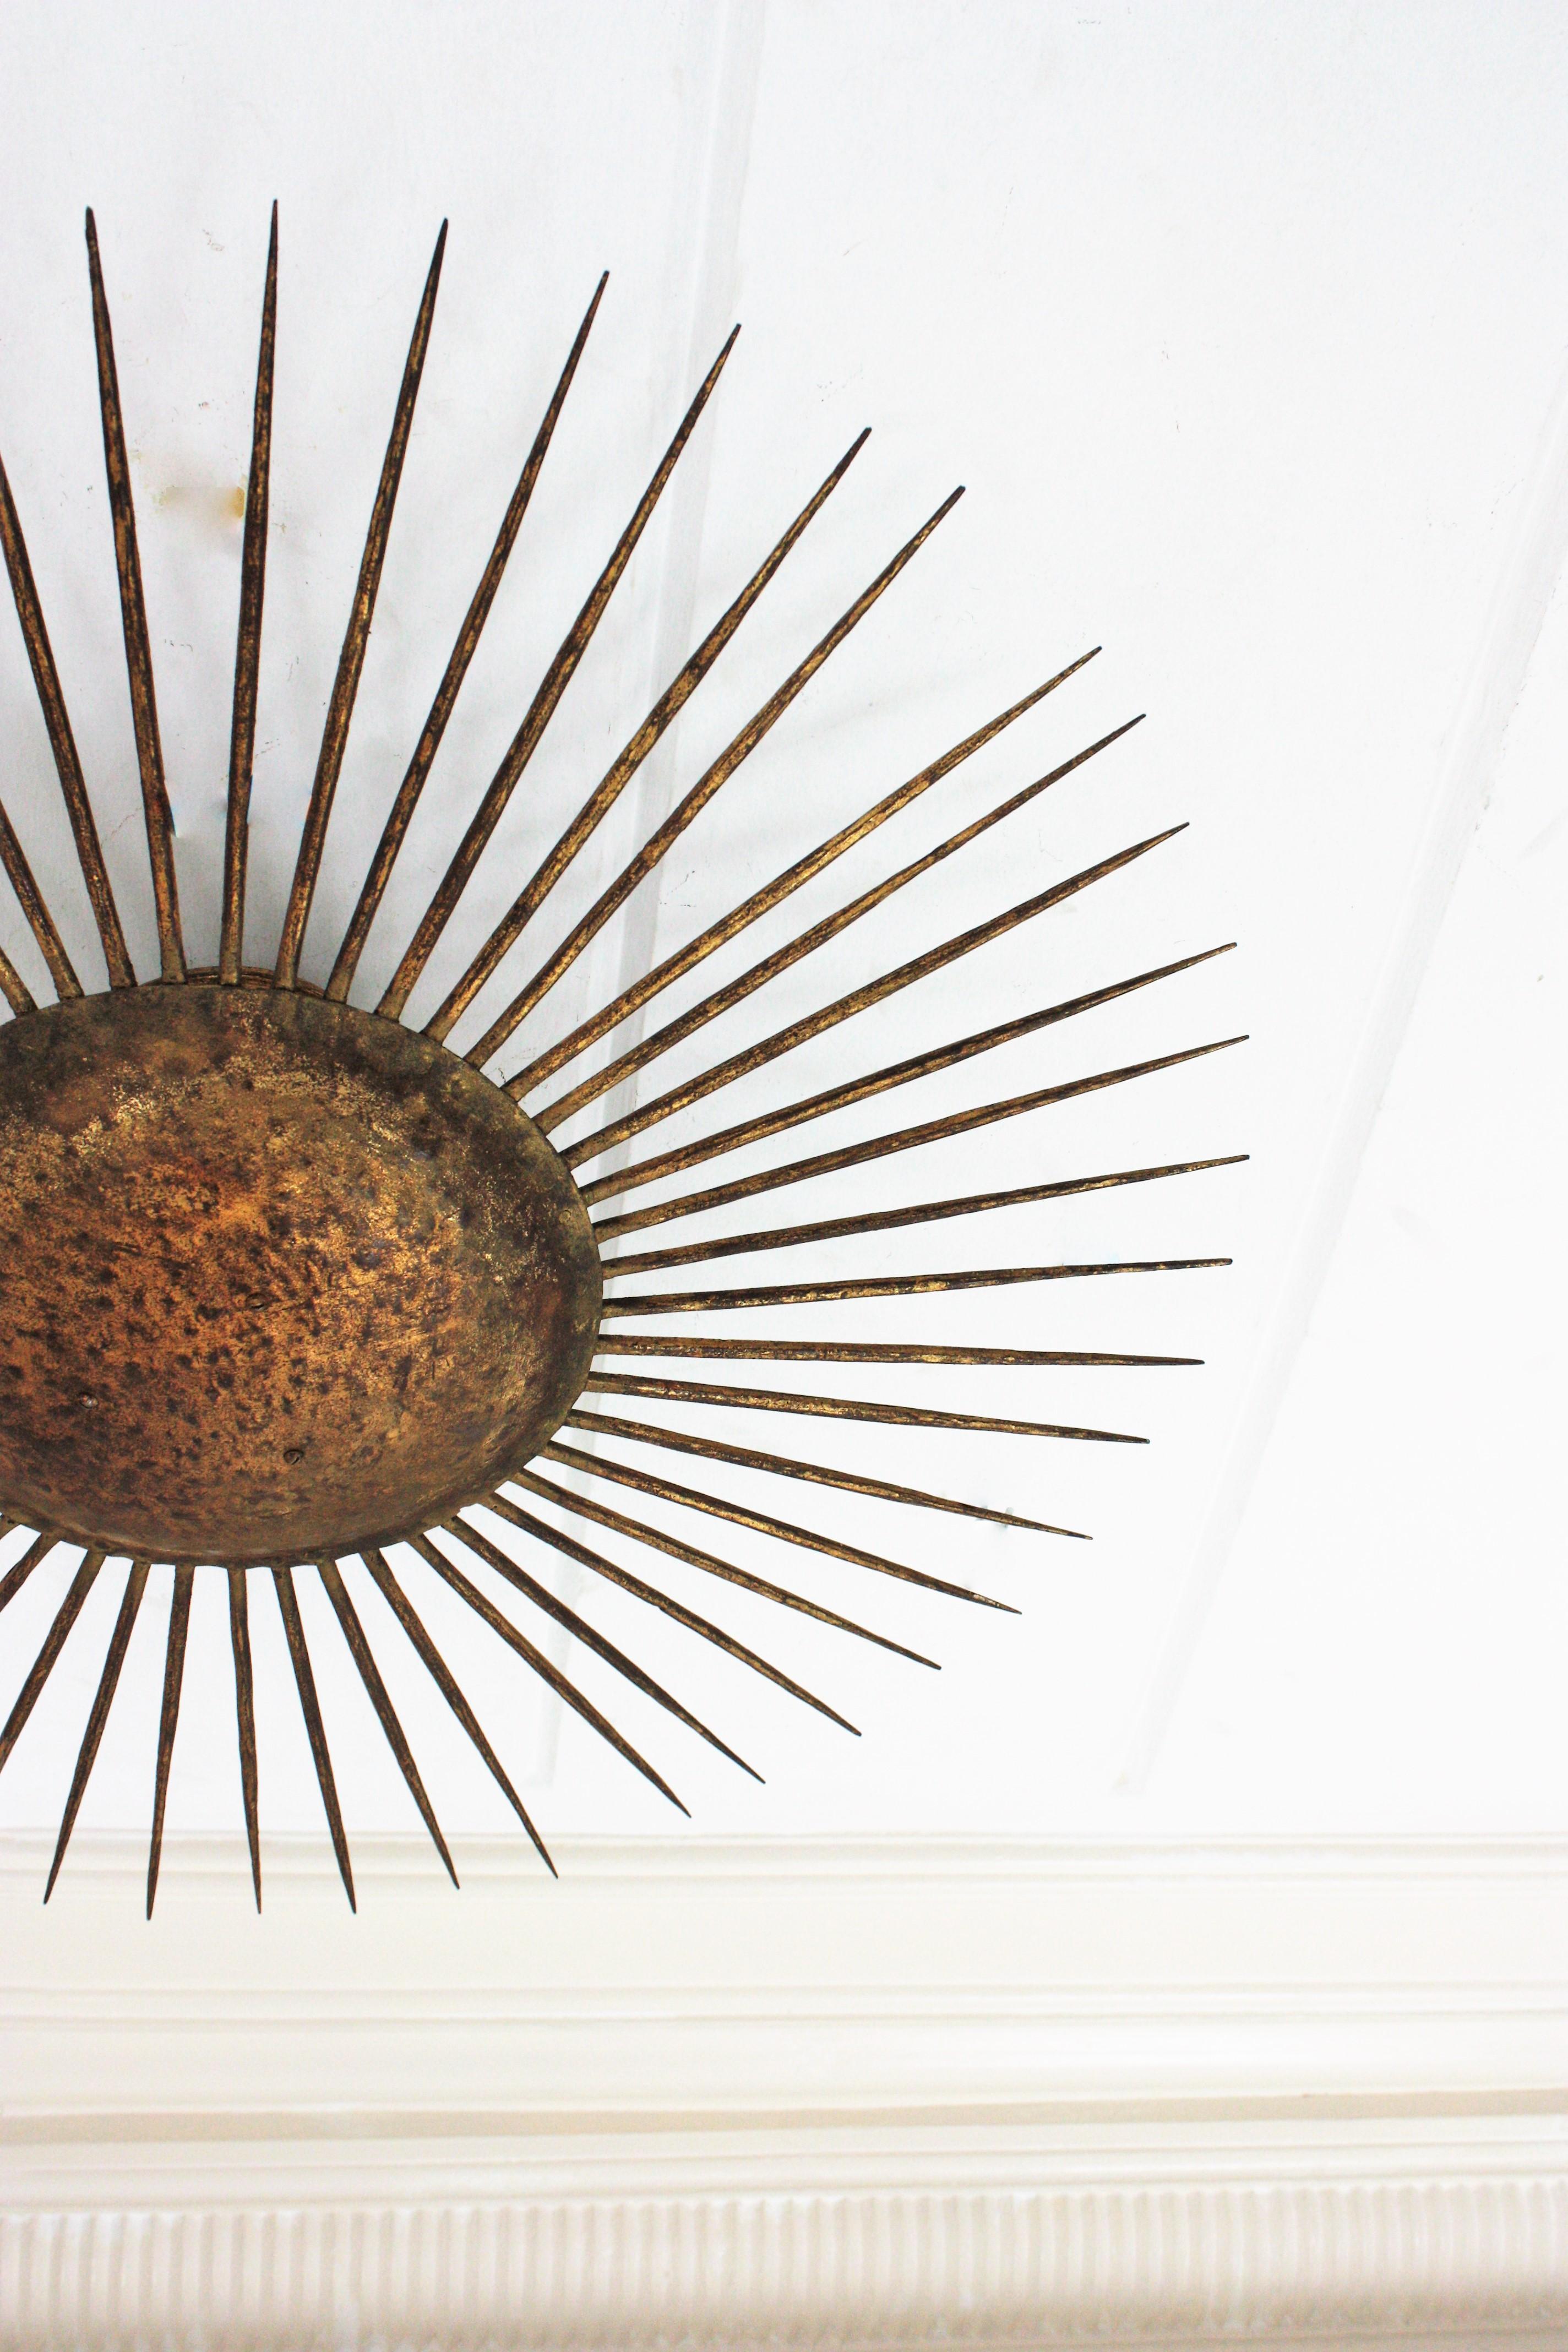 French Sunburst Ceiling Light Fixture in Gilt Wrought Iron, 1940s For Sale 7